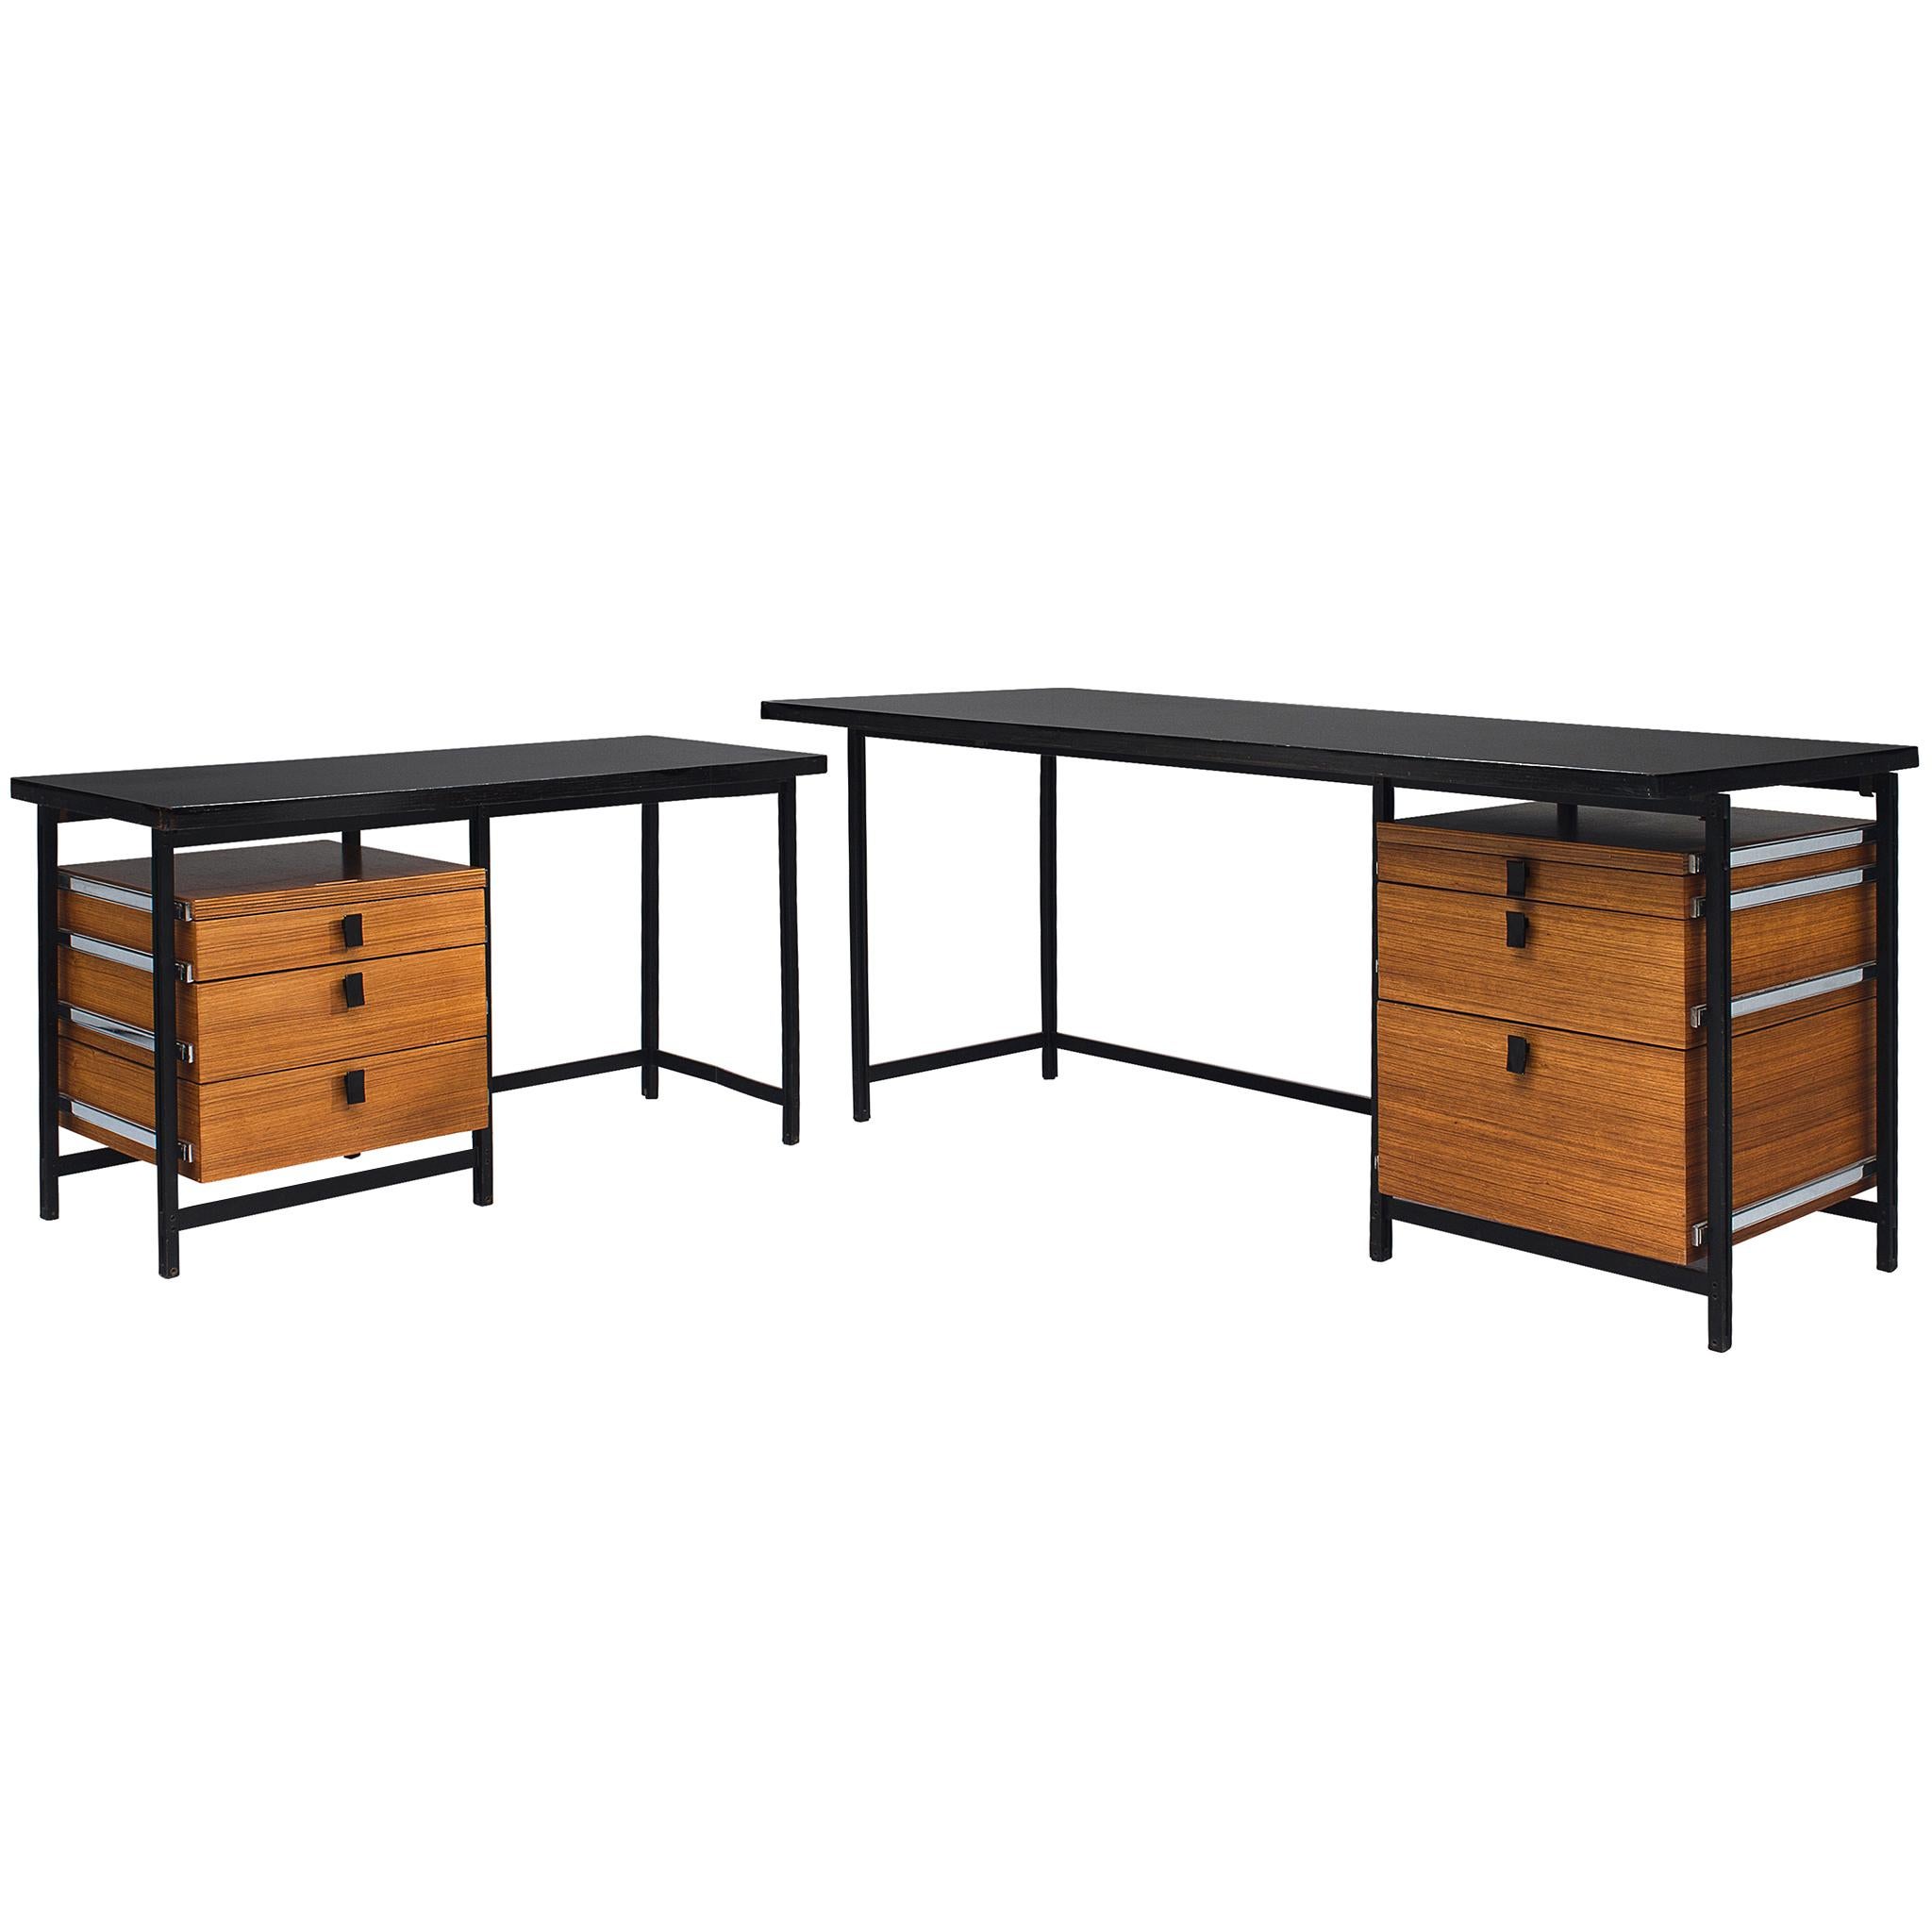 Jules Wabbes Early Executive Desk in Teak and Metal